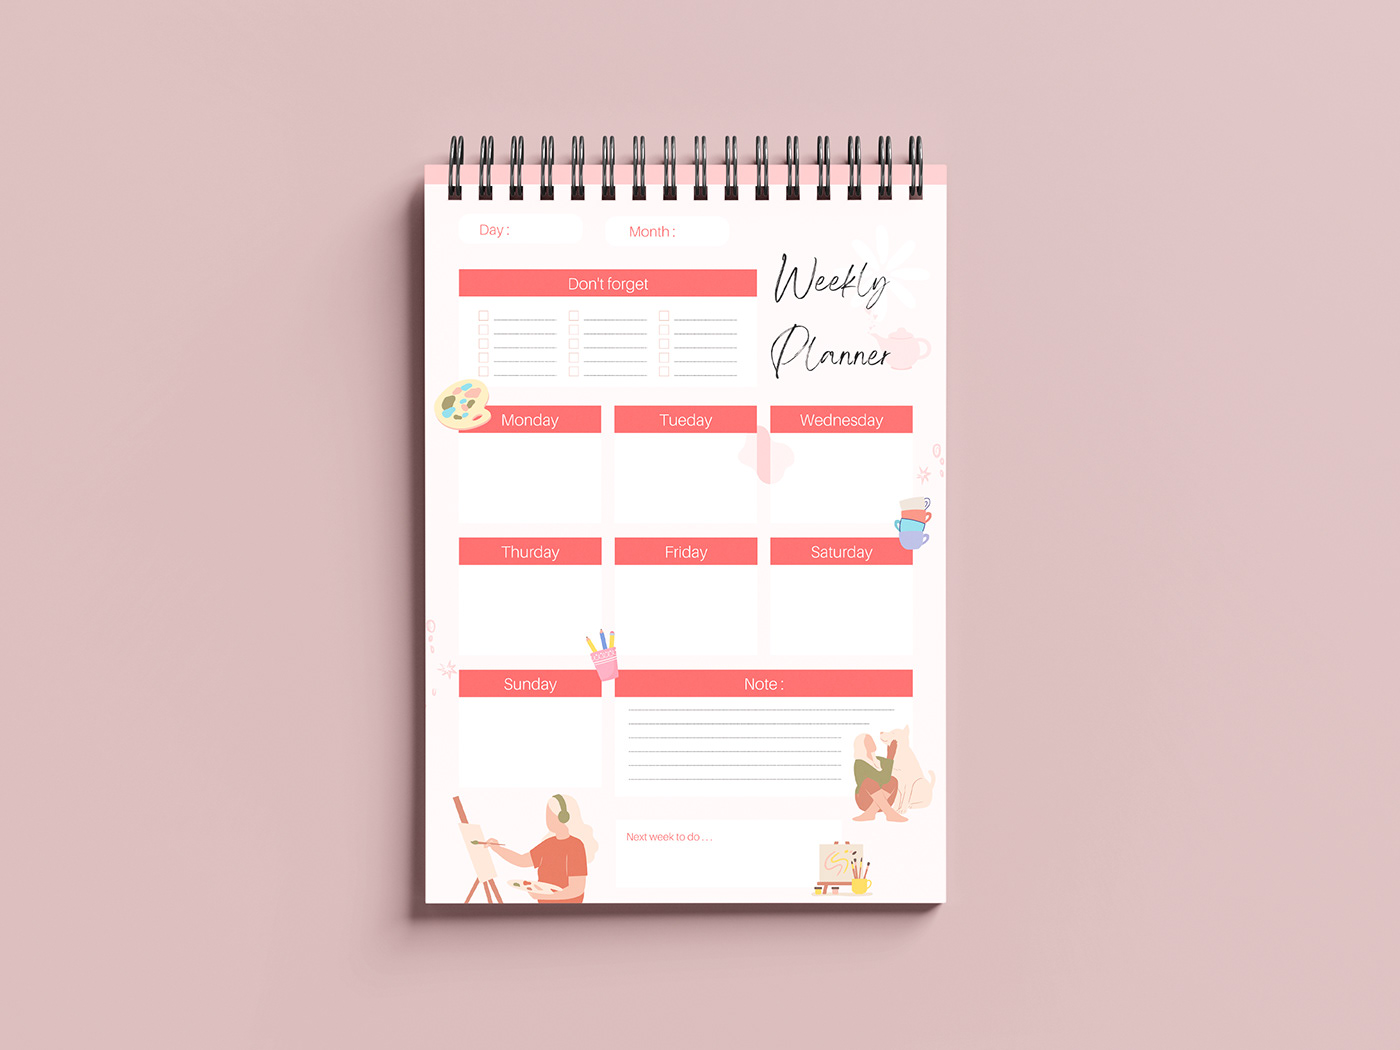 design note planner to do list Weekly weekly palanner